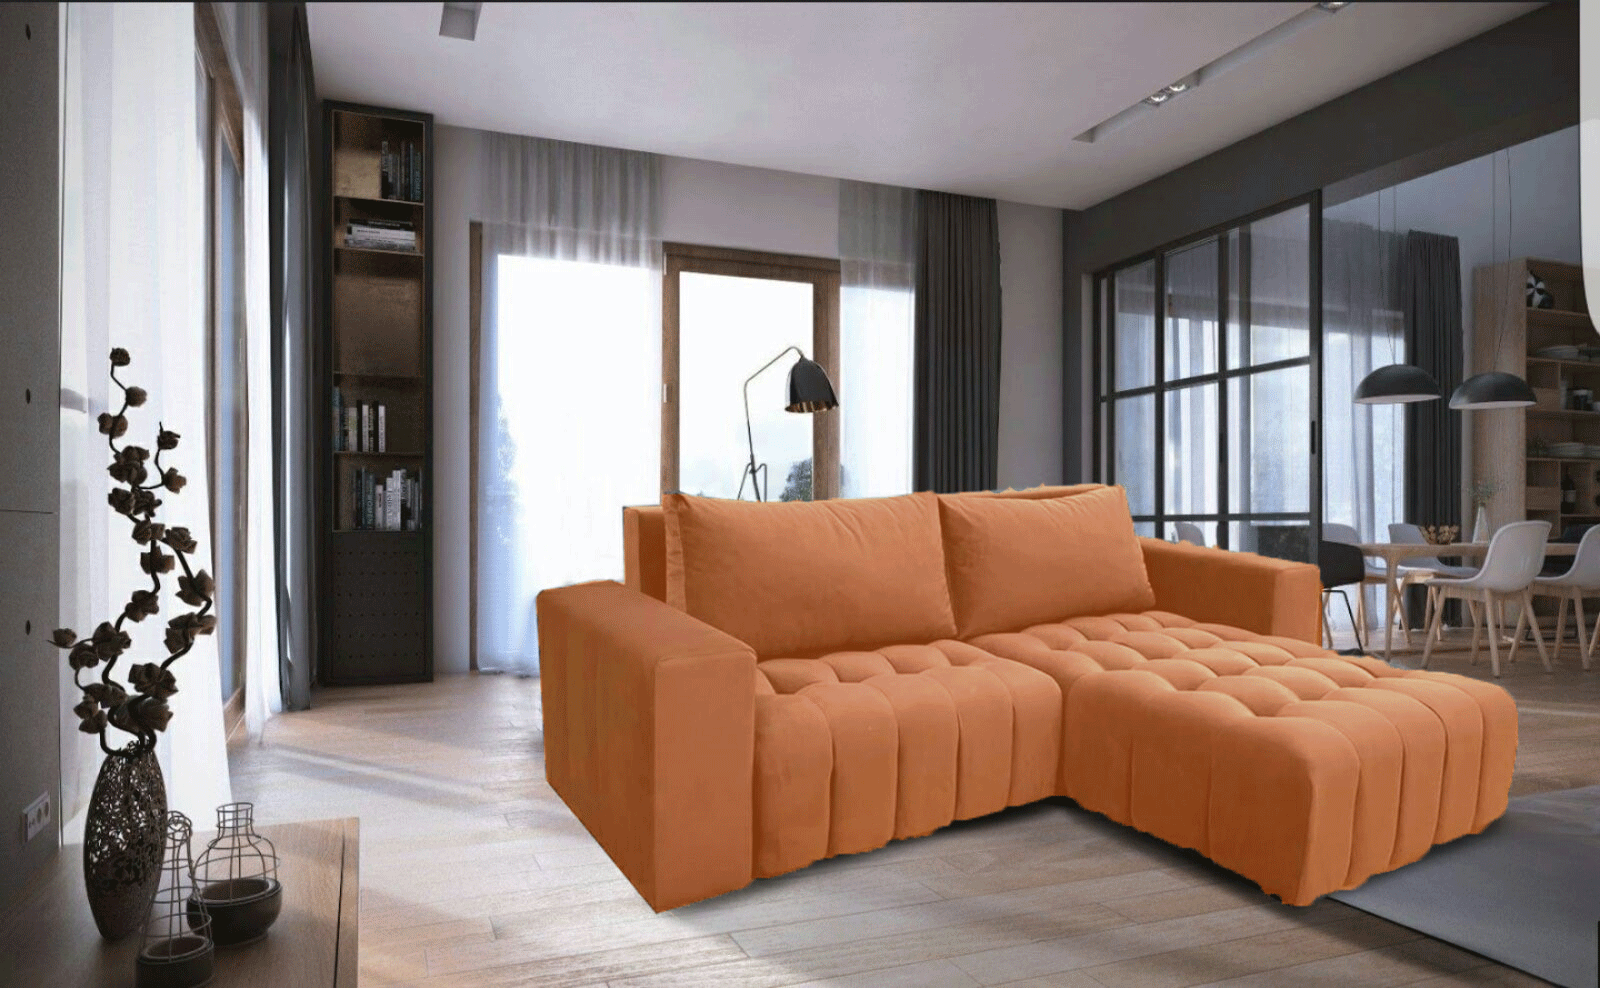 Living Room Furniture Reclining and Sliding Seats Sets Neo sofa bed w/ storage Orange